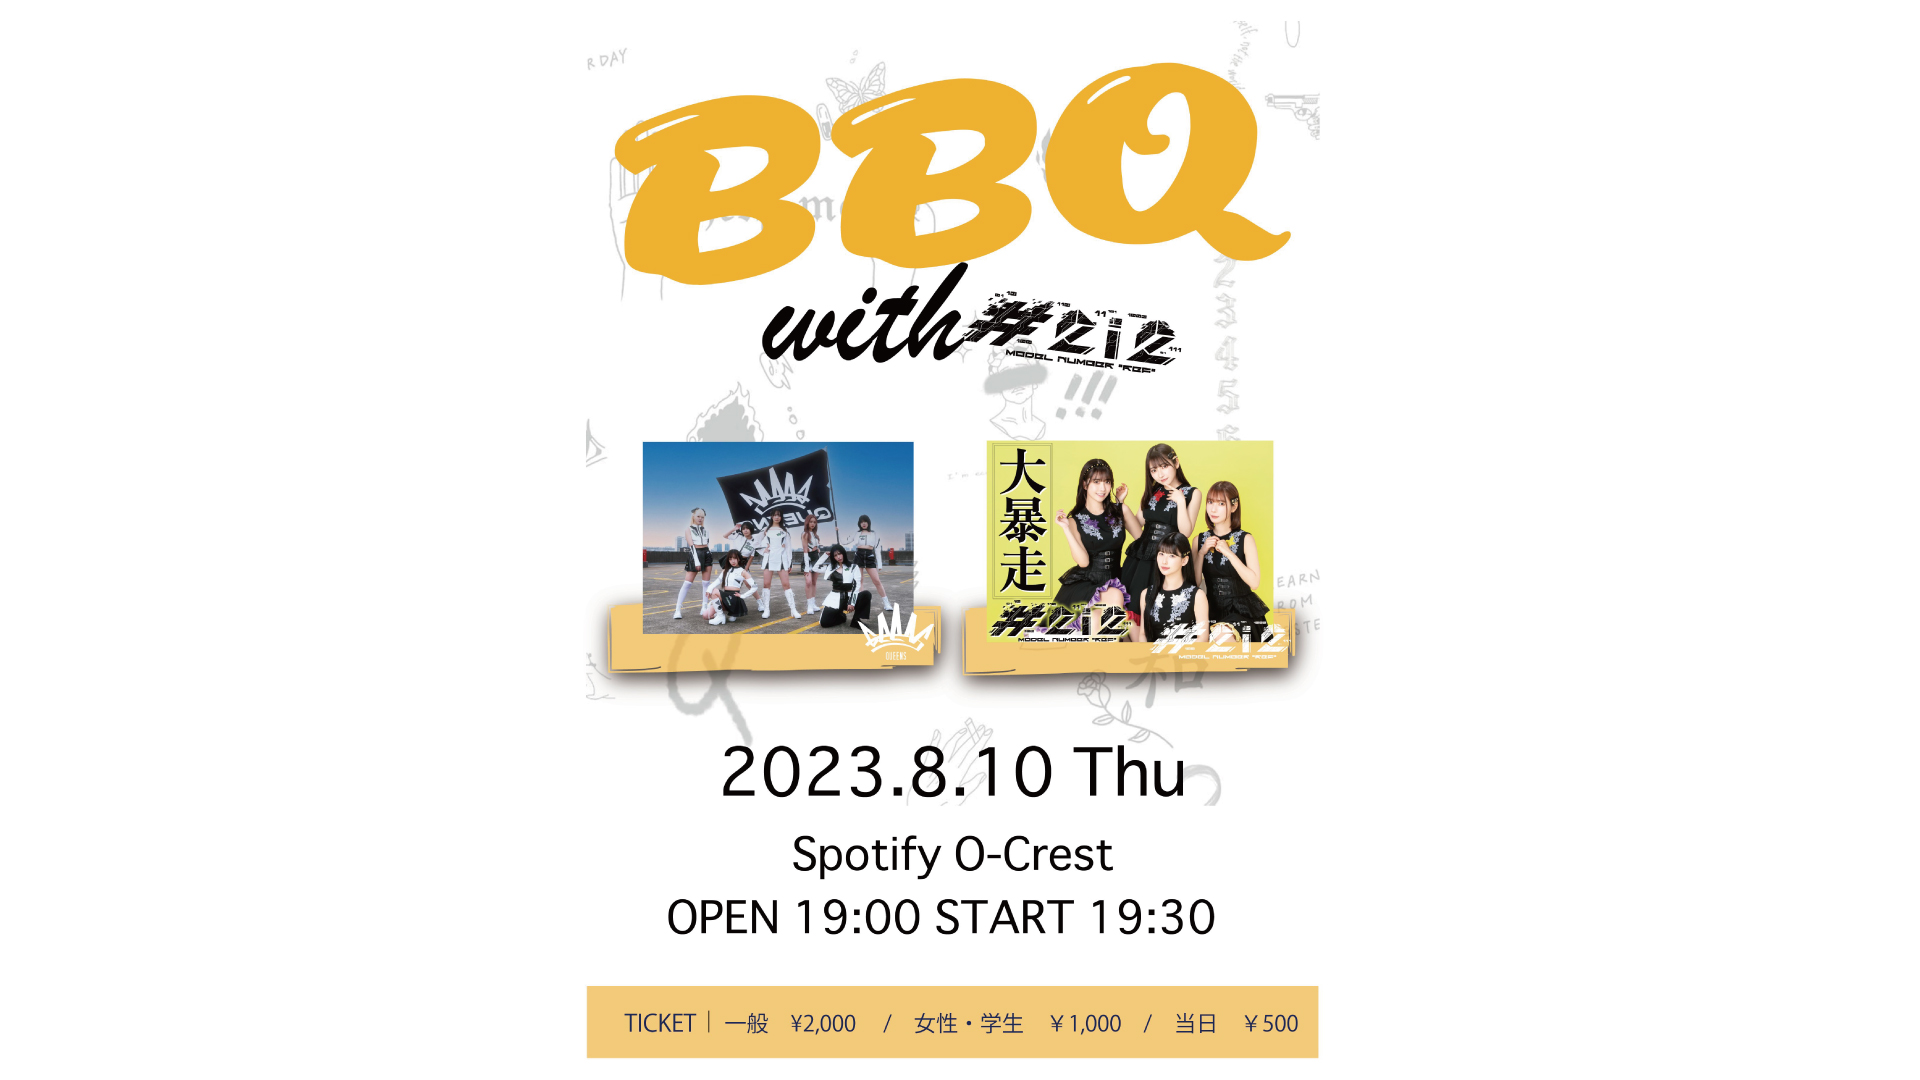 8/10 「BBQ with #2i2 」